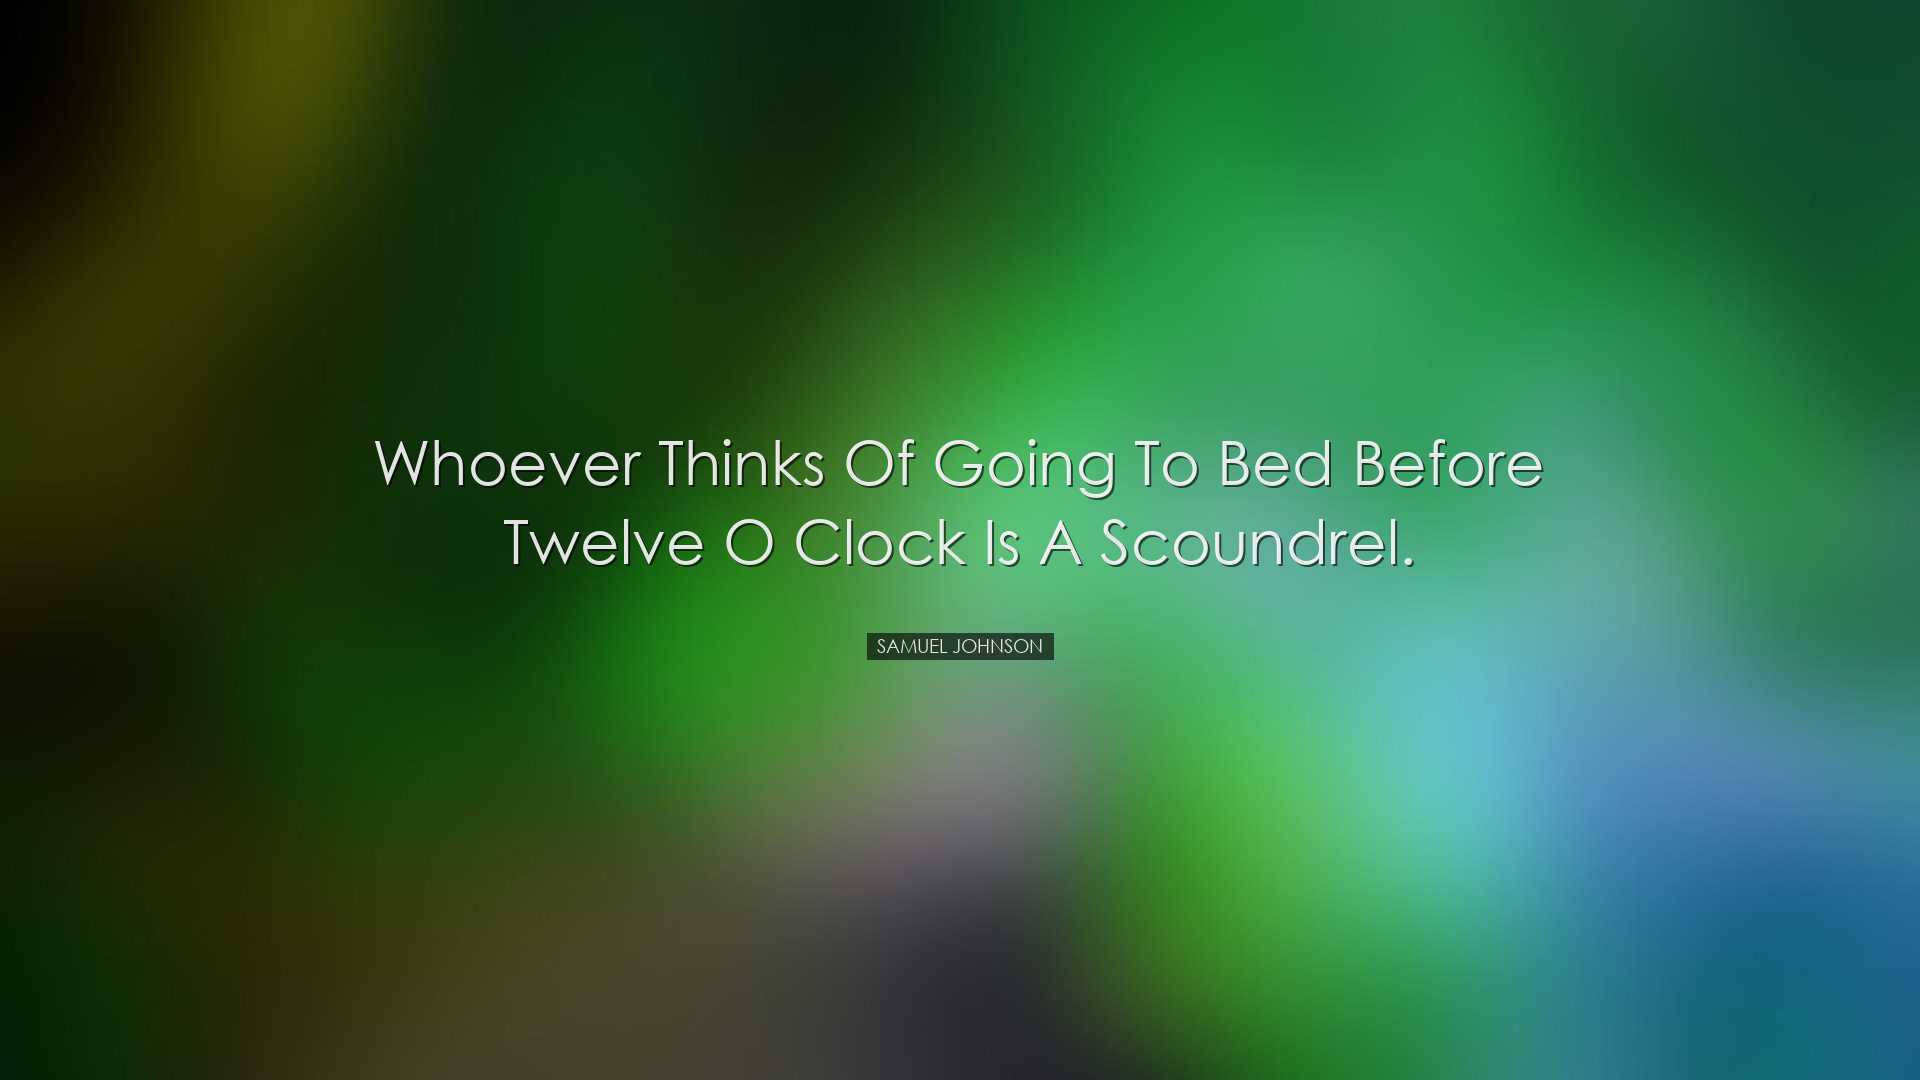 Whoever thinks of going to bed before twelve o clock is a scoundre